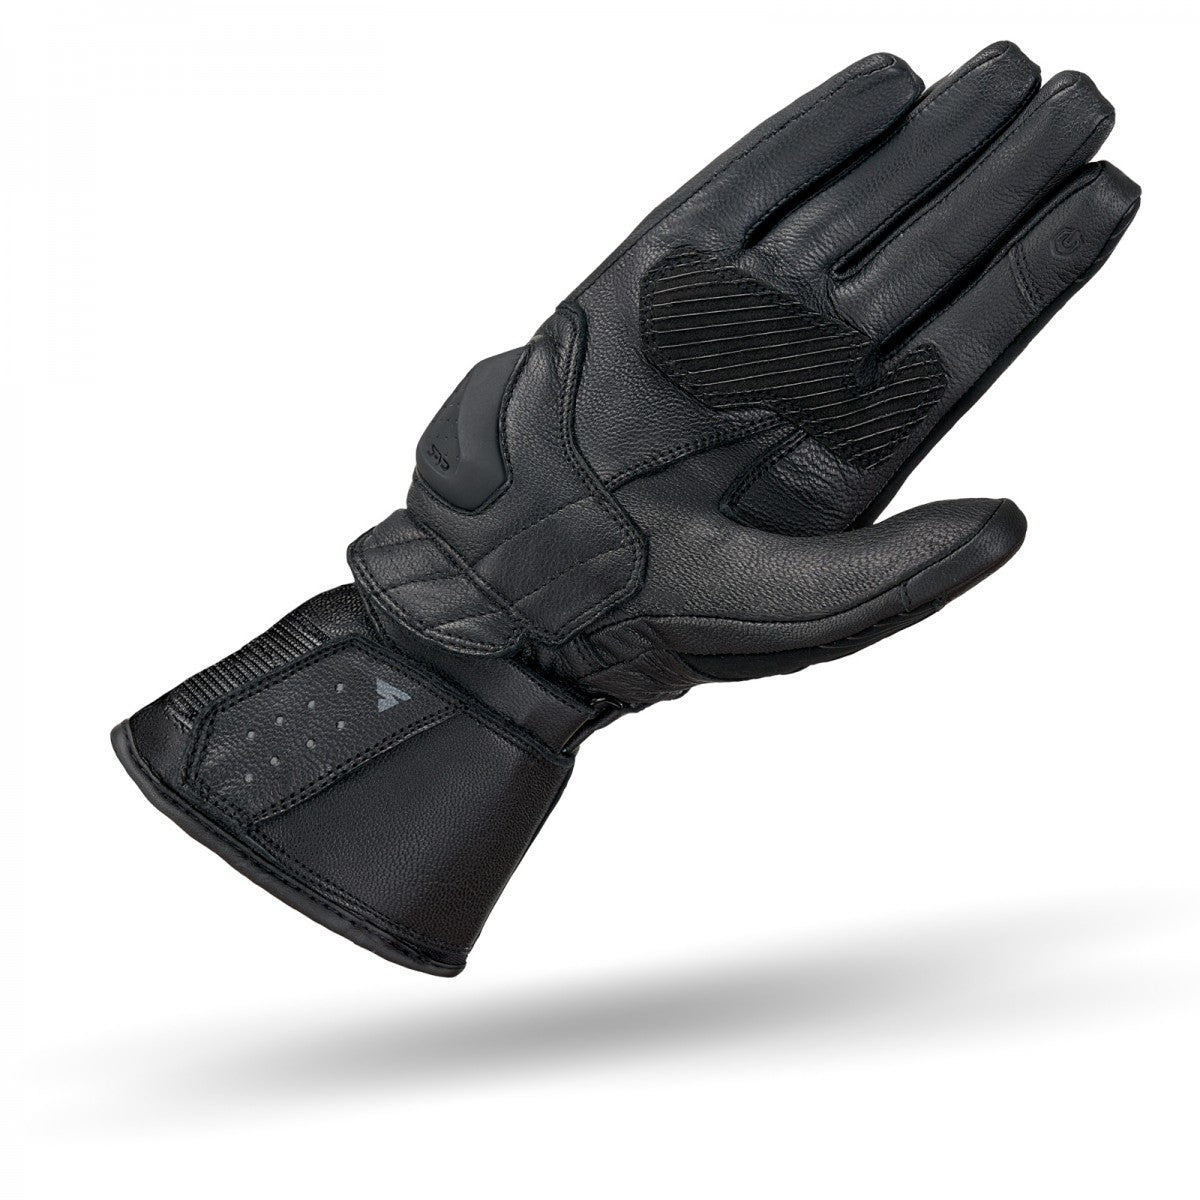 Black women's motorcycle glove from Shima